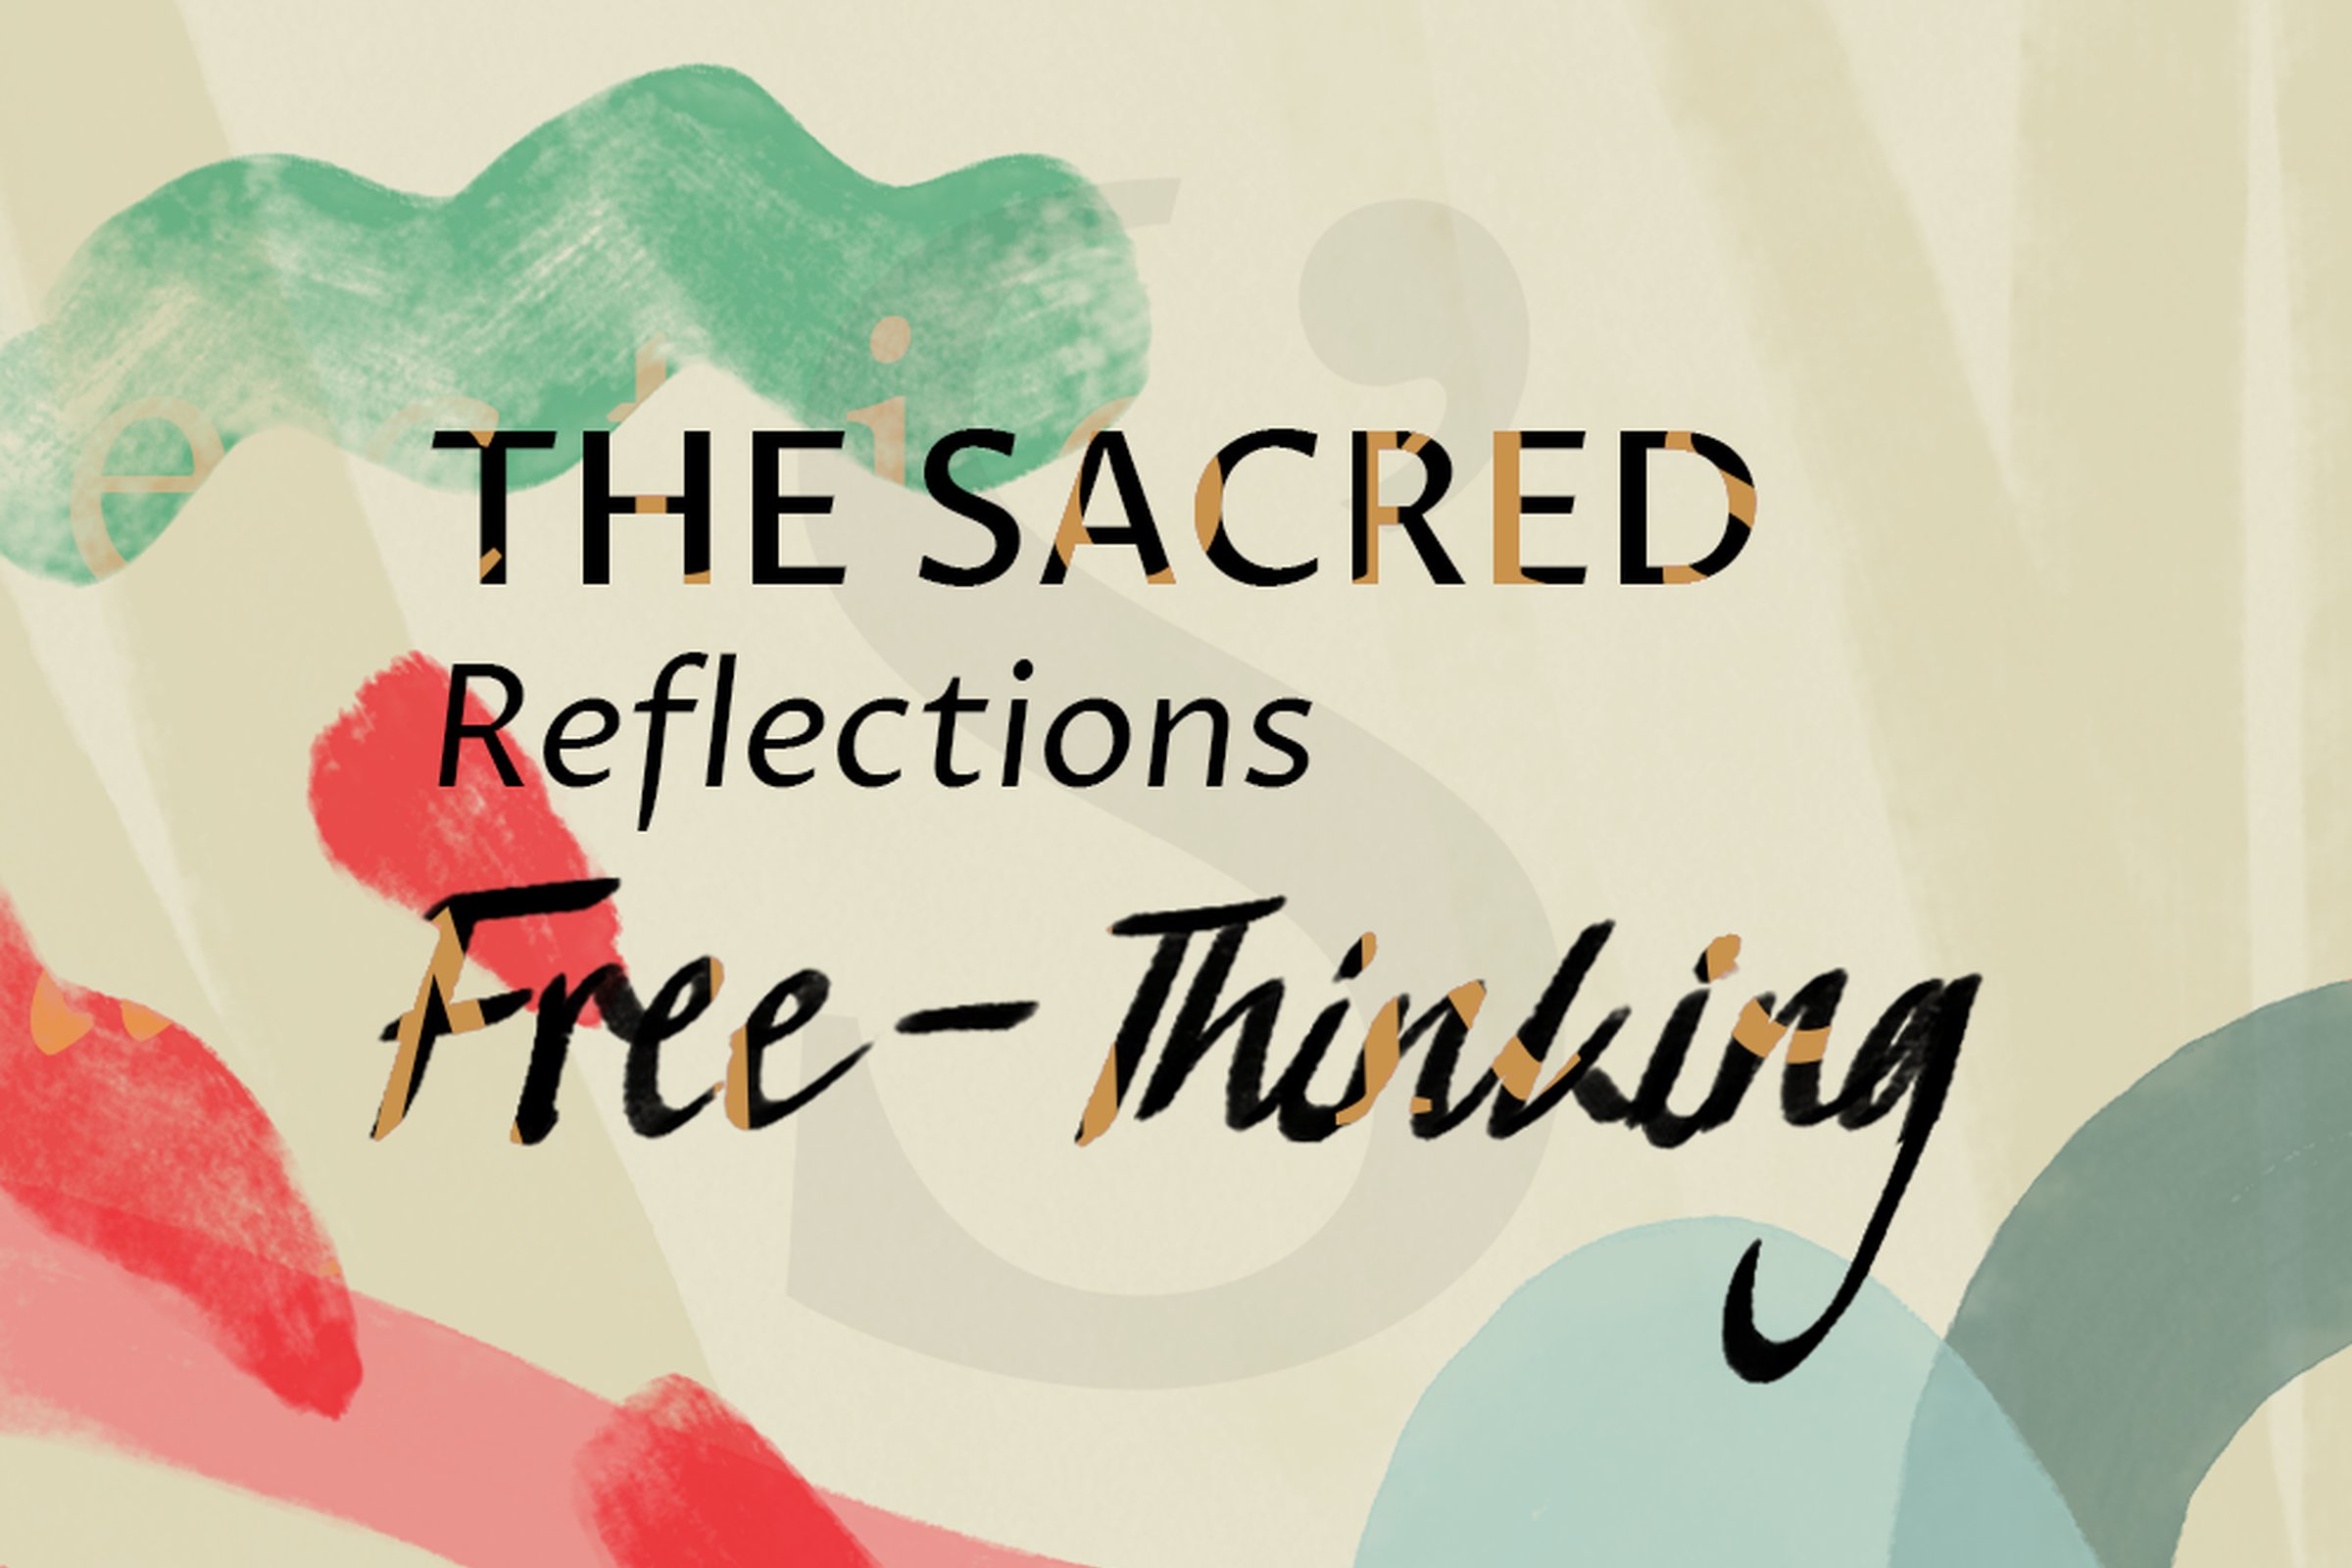 The Sacred Reflections: Free–Thinking